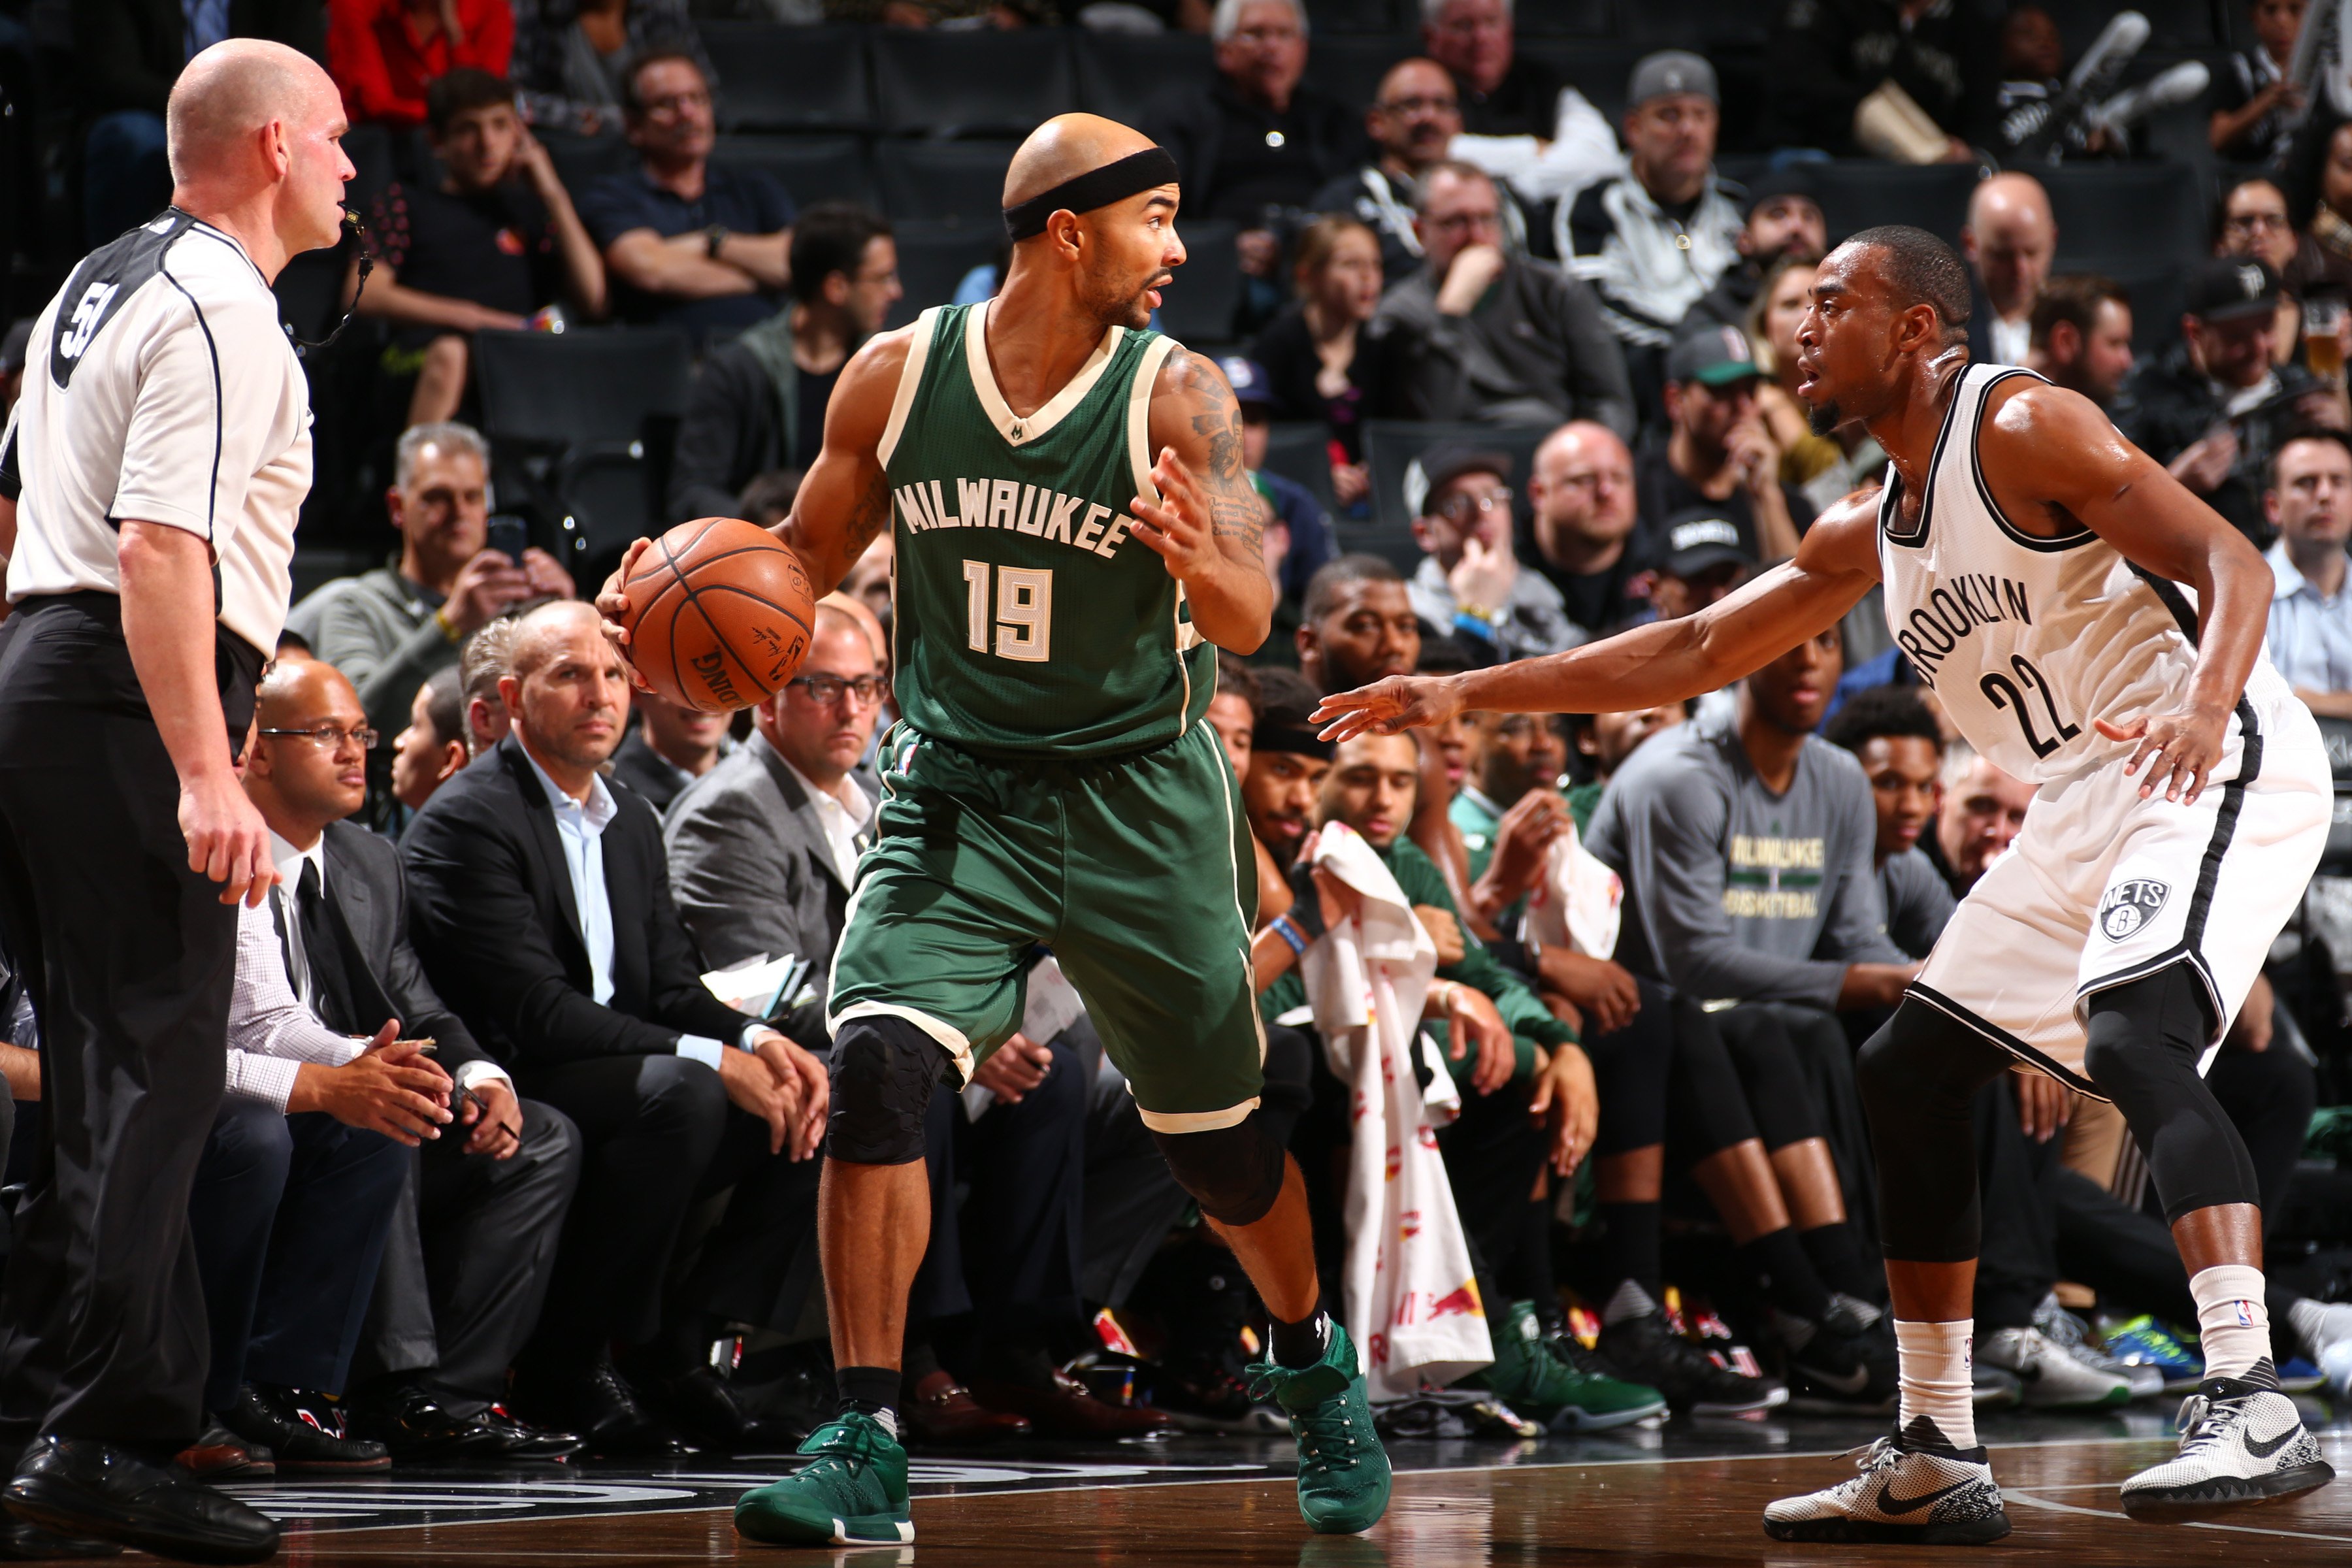 Jerryd Bayless ties a career high w/ 6 made 3FG's as the. 